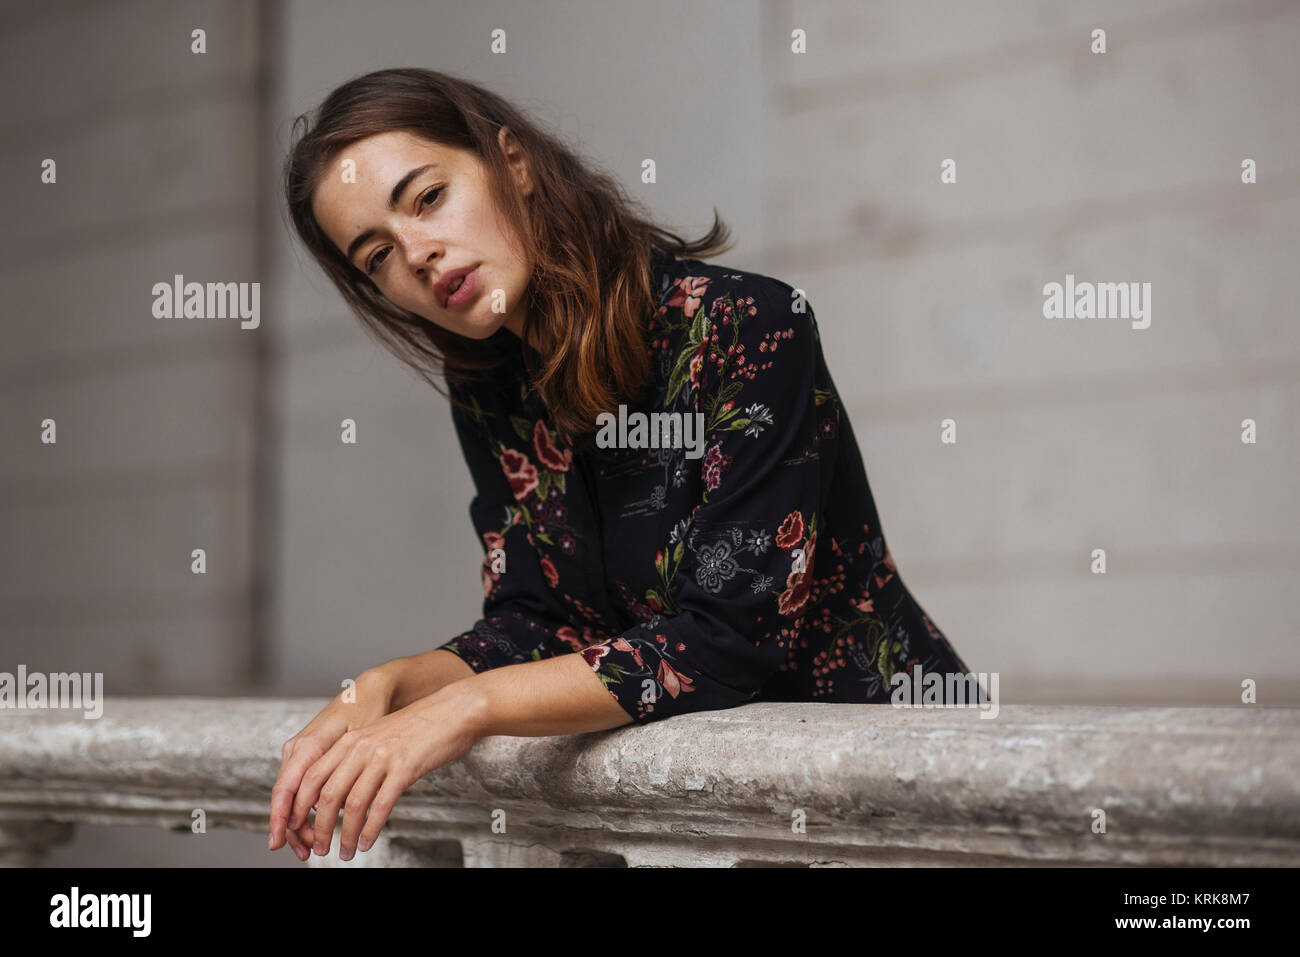 Caucasian woman leaning on railing Banque D'Images